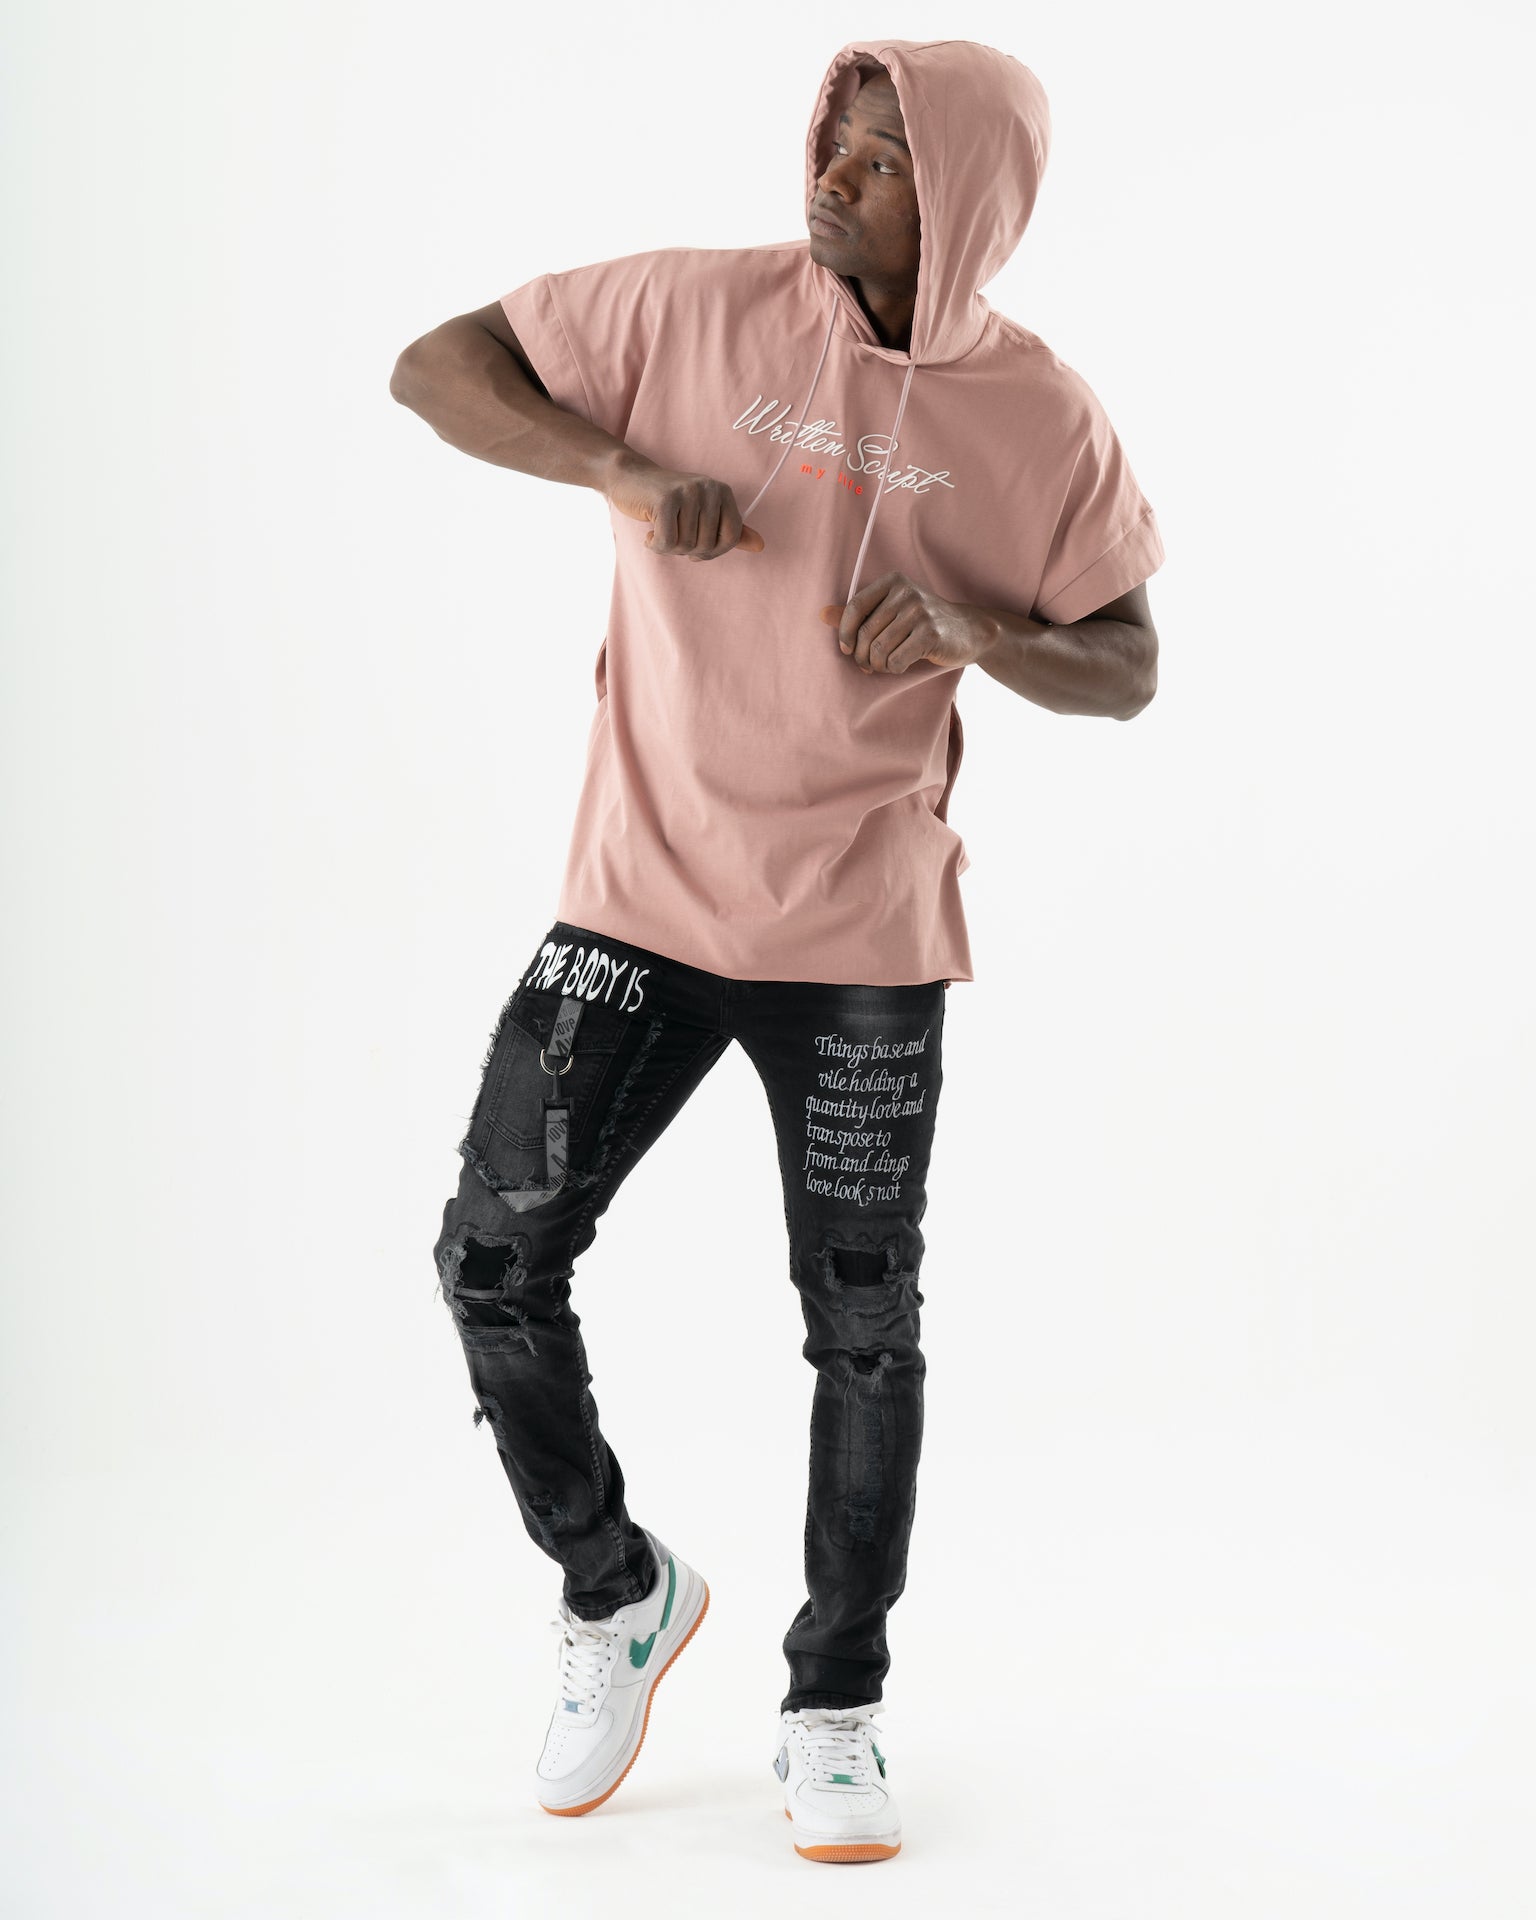 A man wearing a ONE SOUL pink hoodie and black jeans.